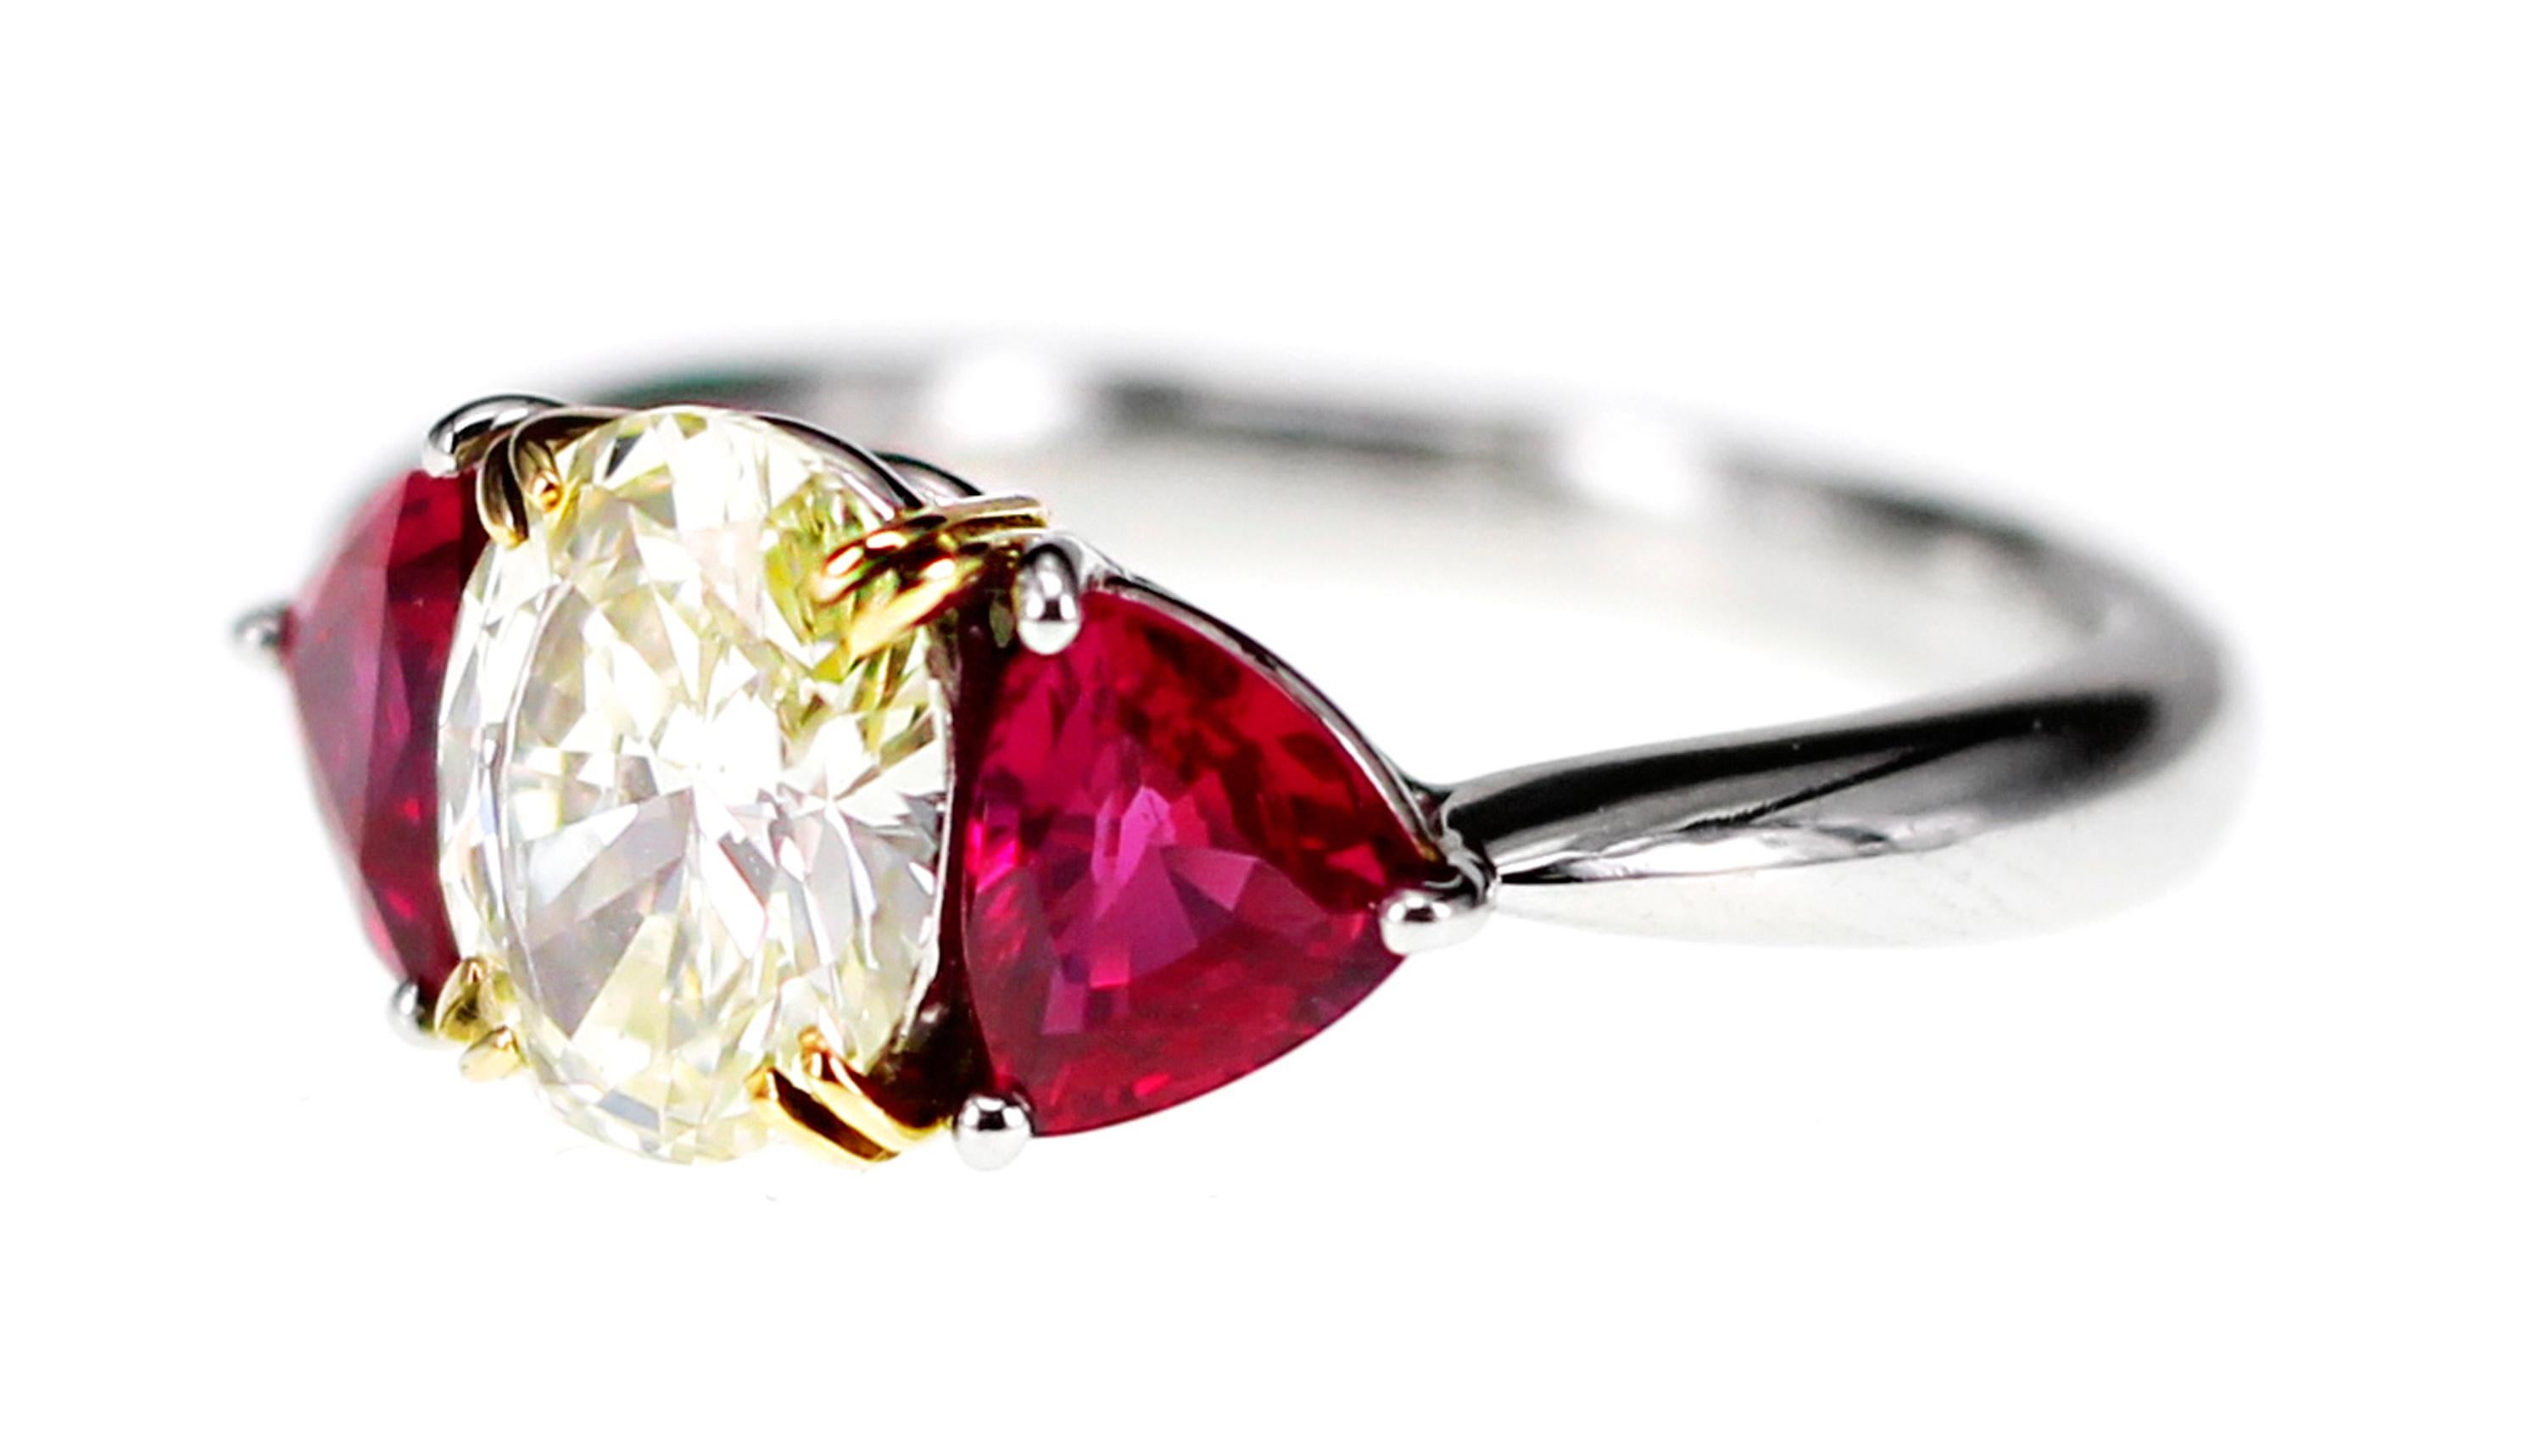 A 1.38 carat CGL Lab certified M color VS 2 clarity is set along with Gem Research Japan Inc Lab Certified 1.53 carat vivid red ruby. The ring is a perfect match of diamonds and ruby for a perfect bridal wear. The ring i made in PT 900 Platinum
The